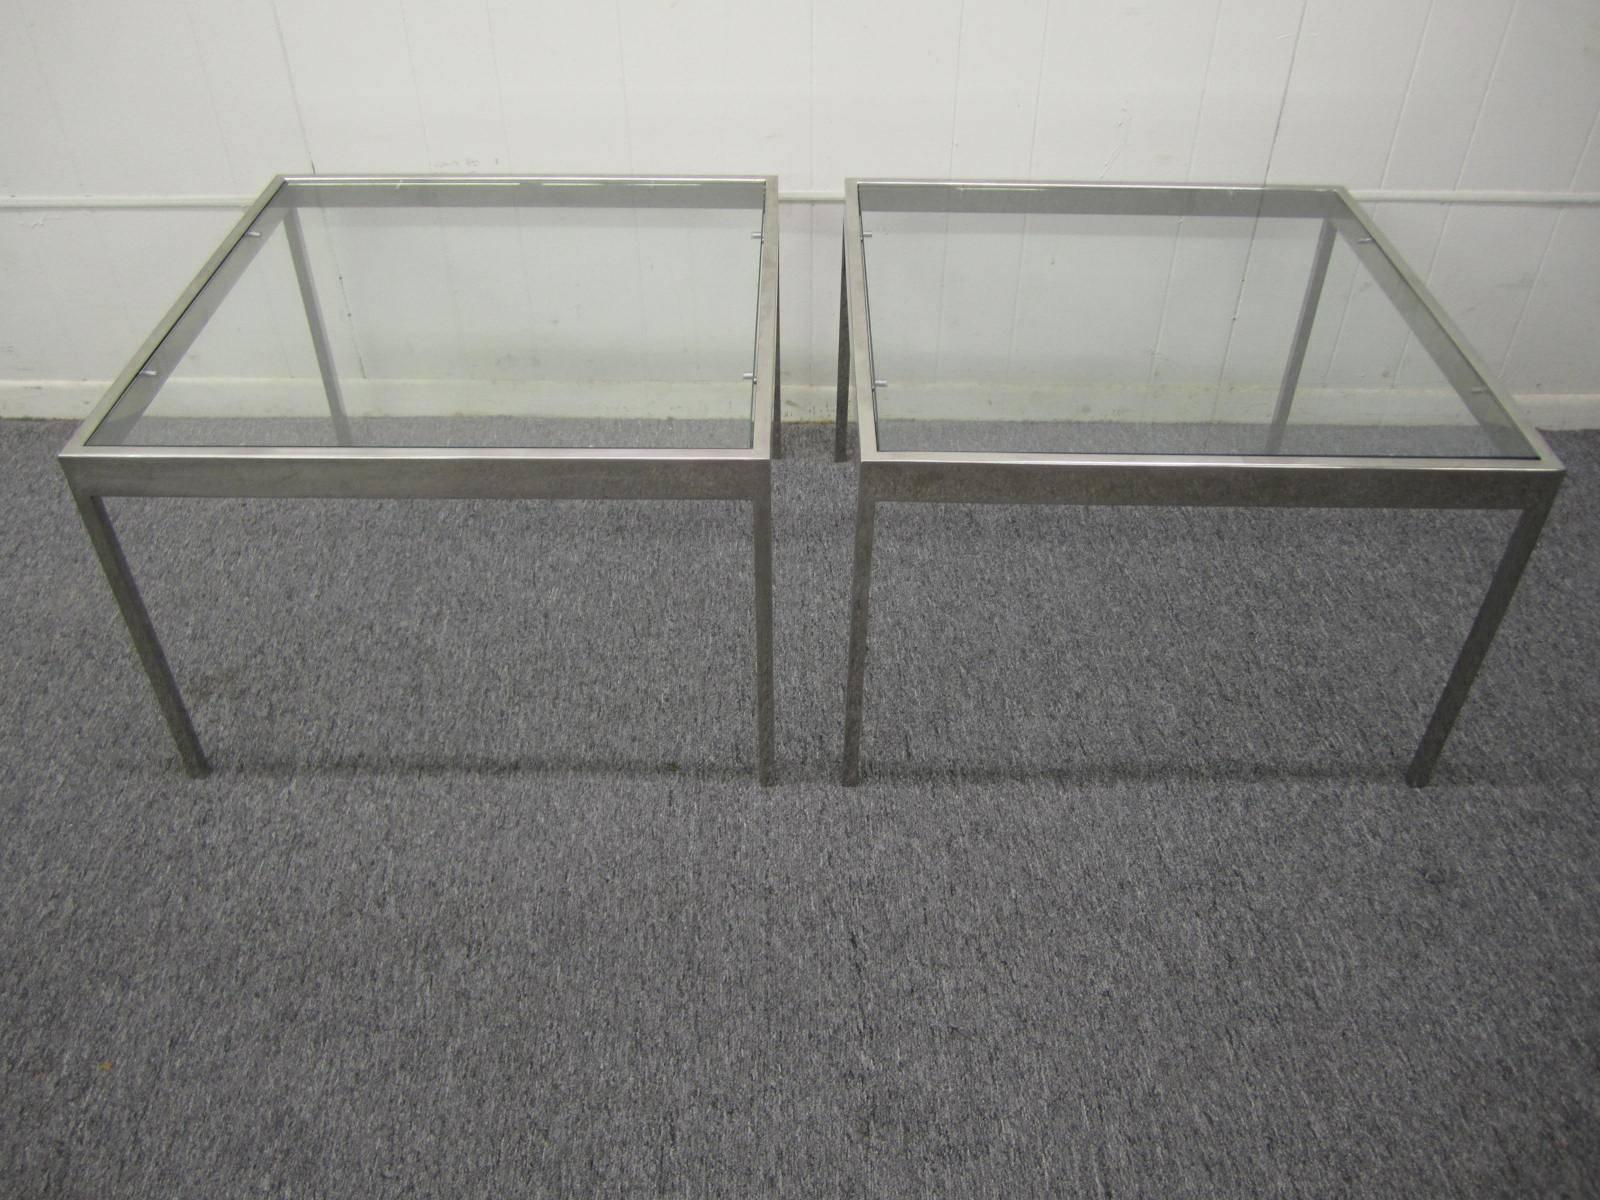 Handsome Pair of Milo Baughman Chrome Square Side End Tables Mid-century Modern 4